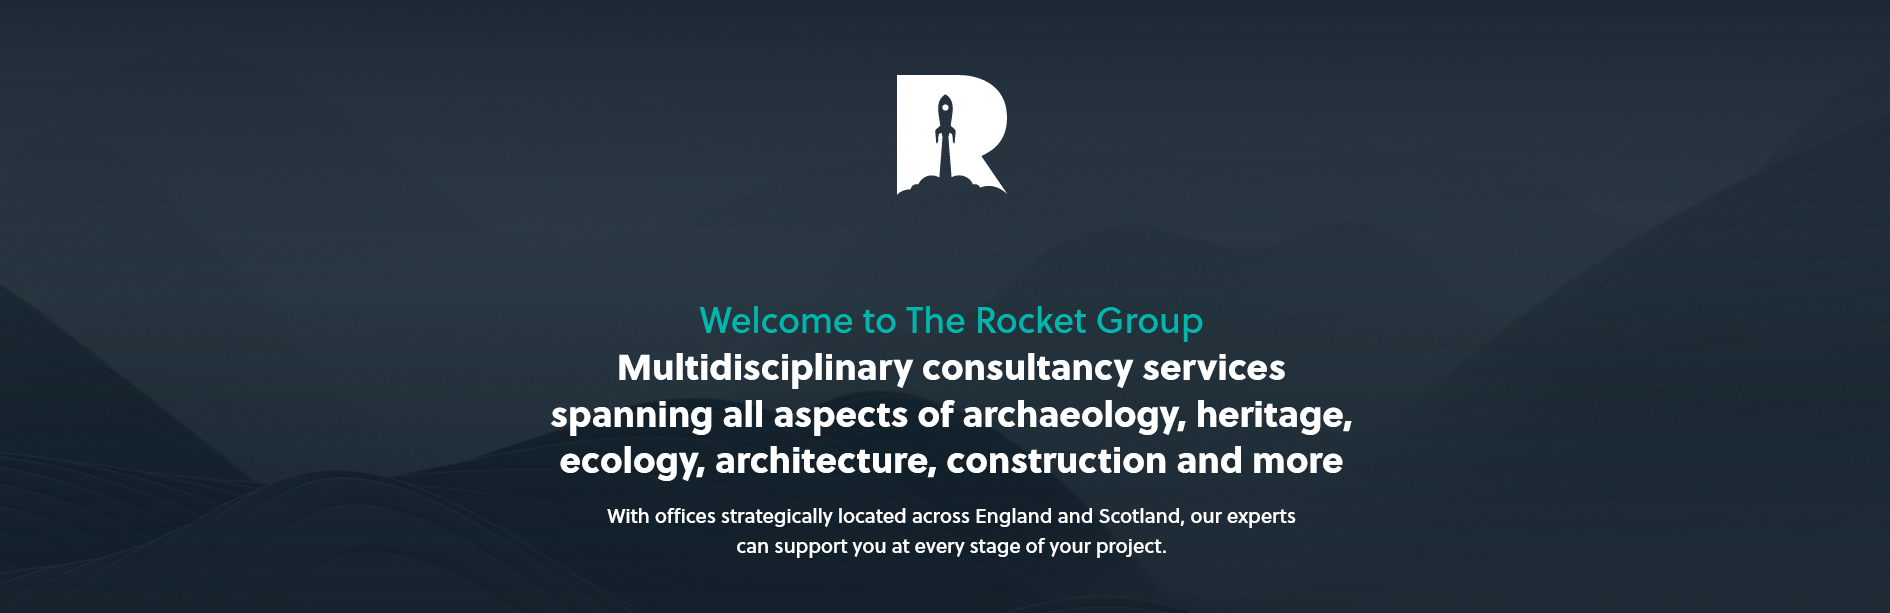 Rocket Group showcases expanded offering with new website